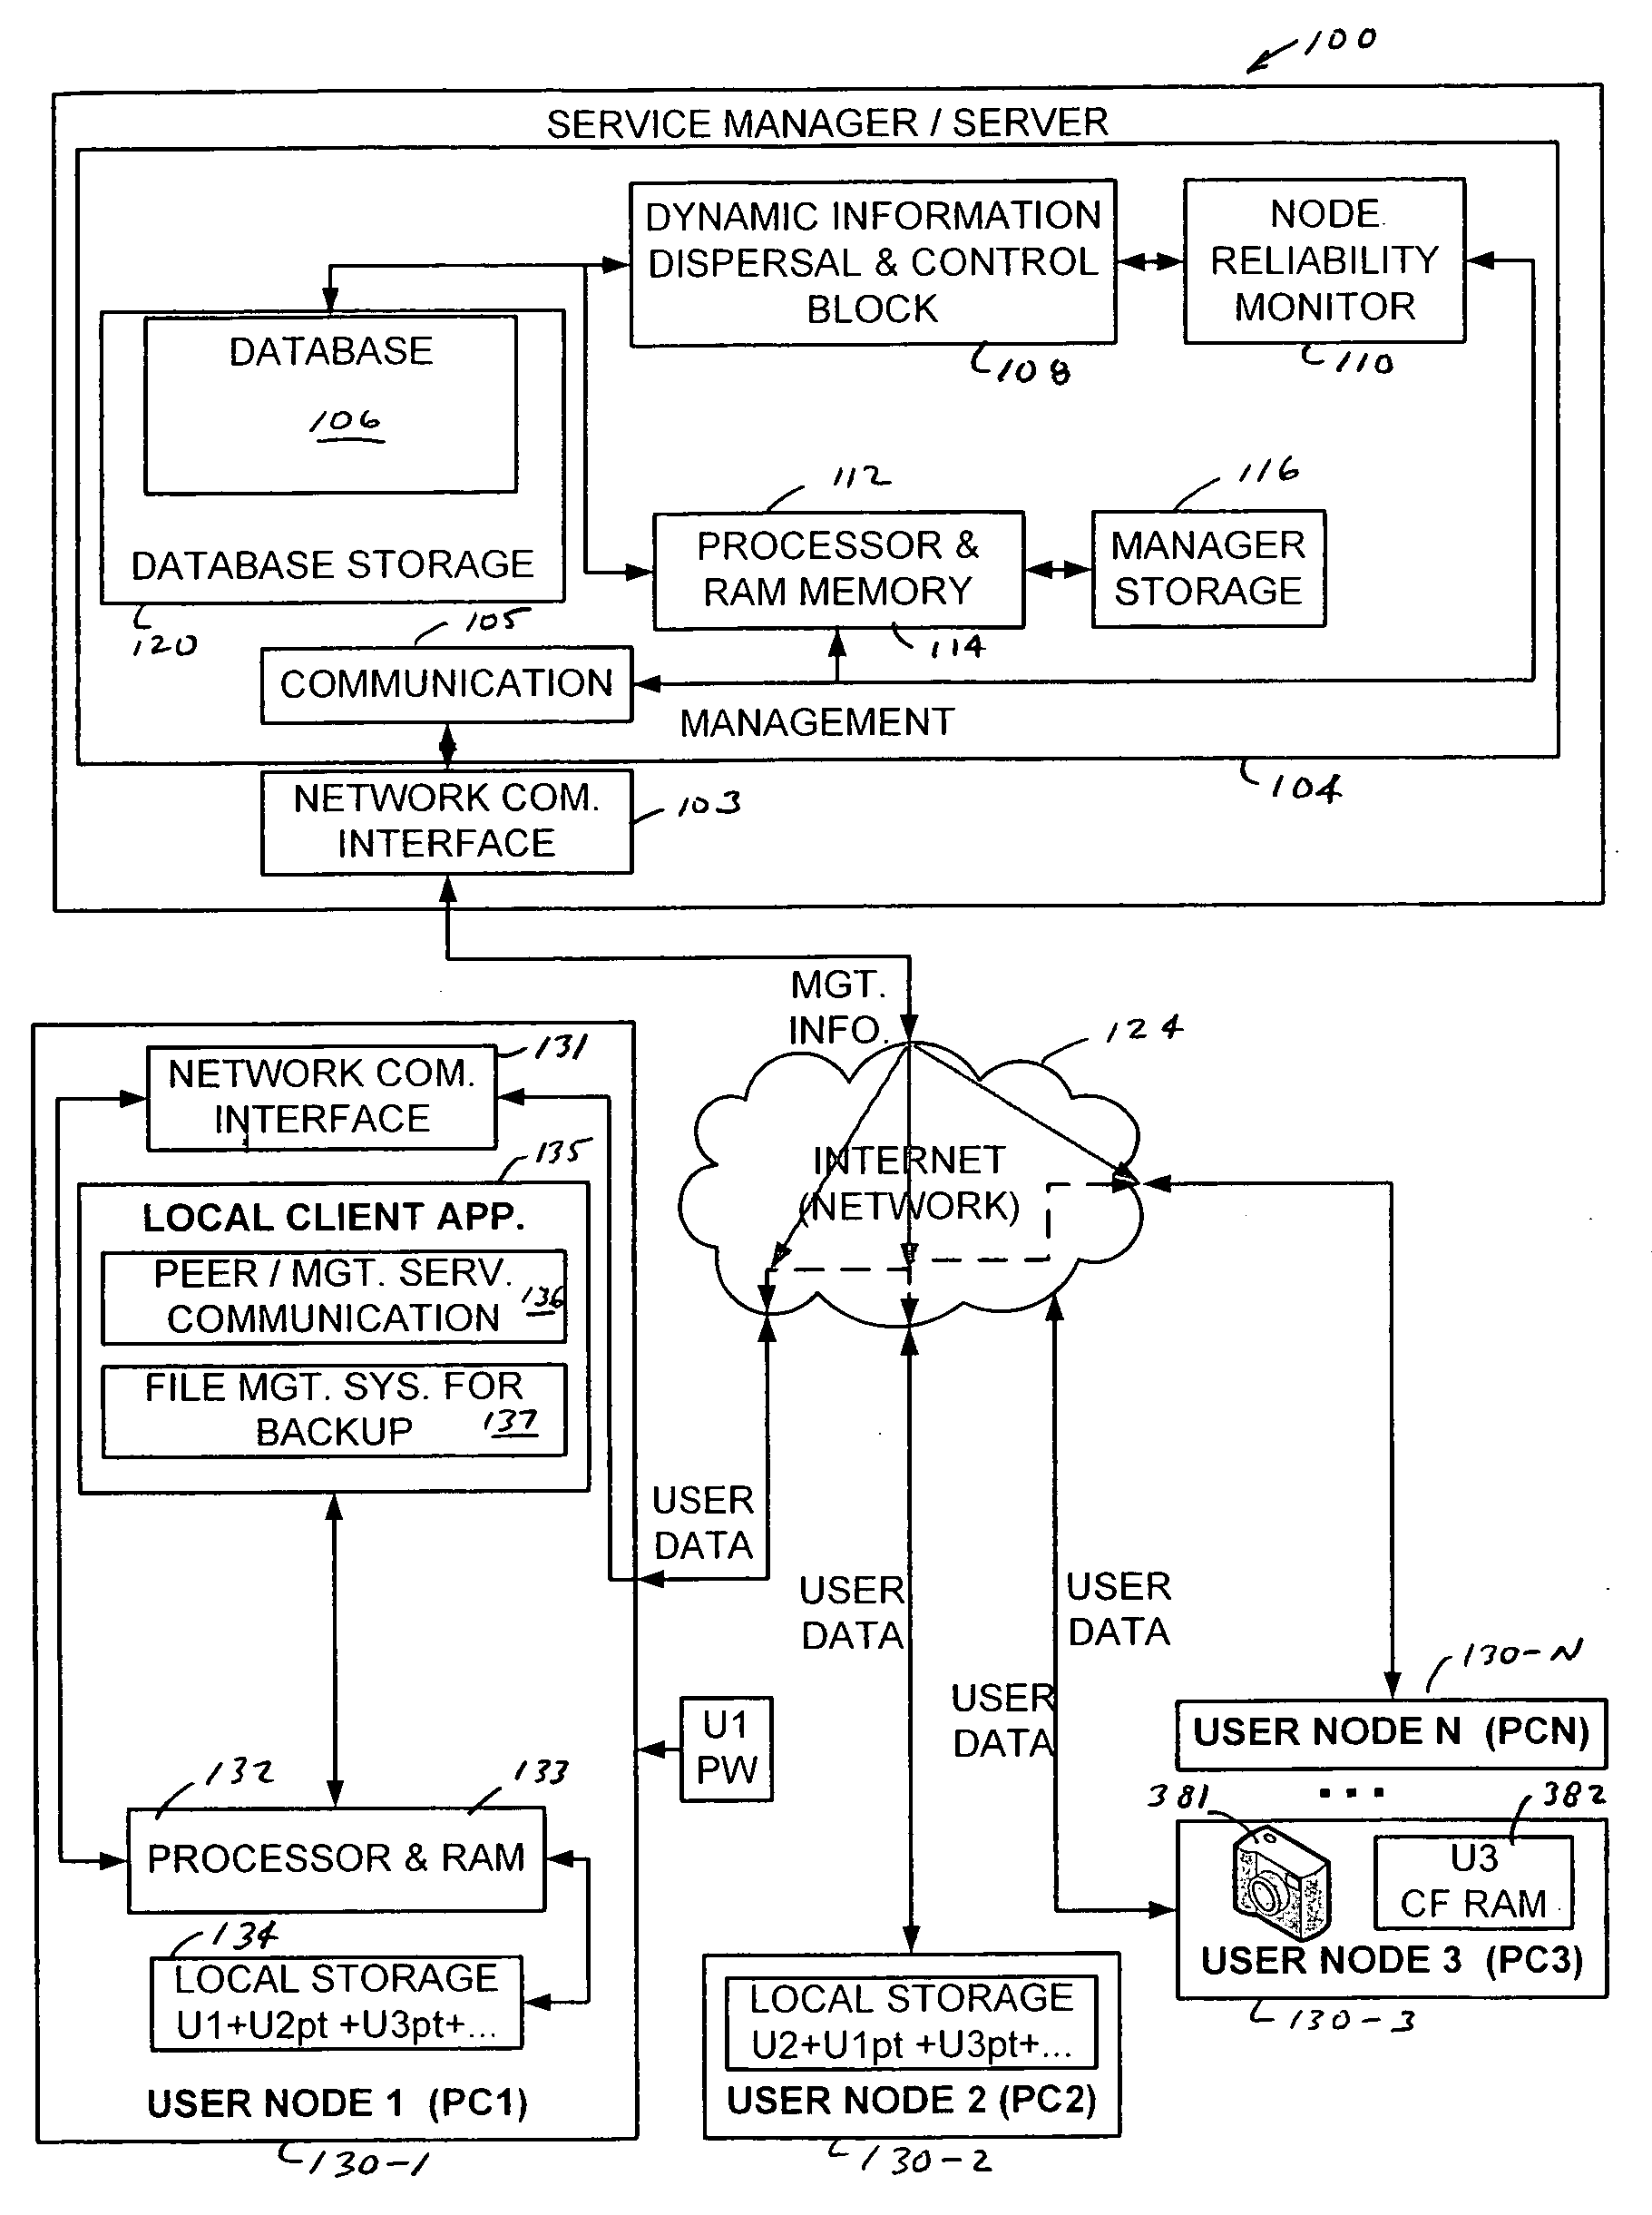 Managed peer-to-peer content backup service system and method using dynamic content dispersal to plural storage nodes